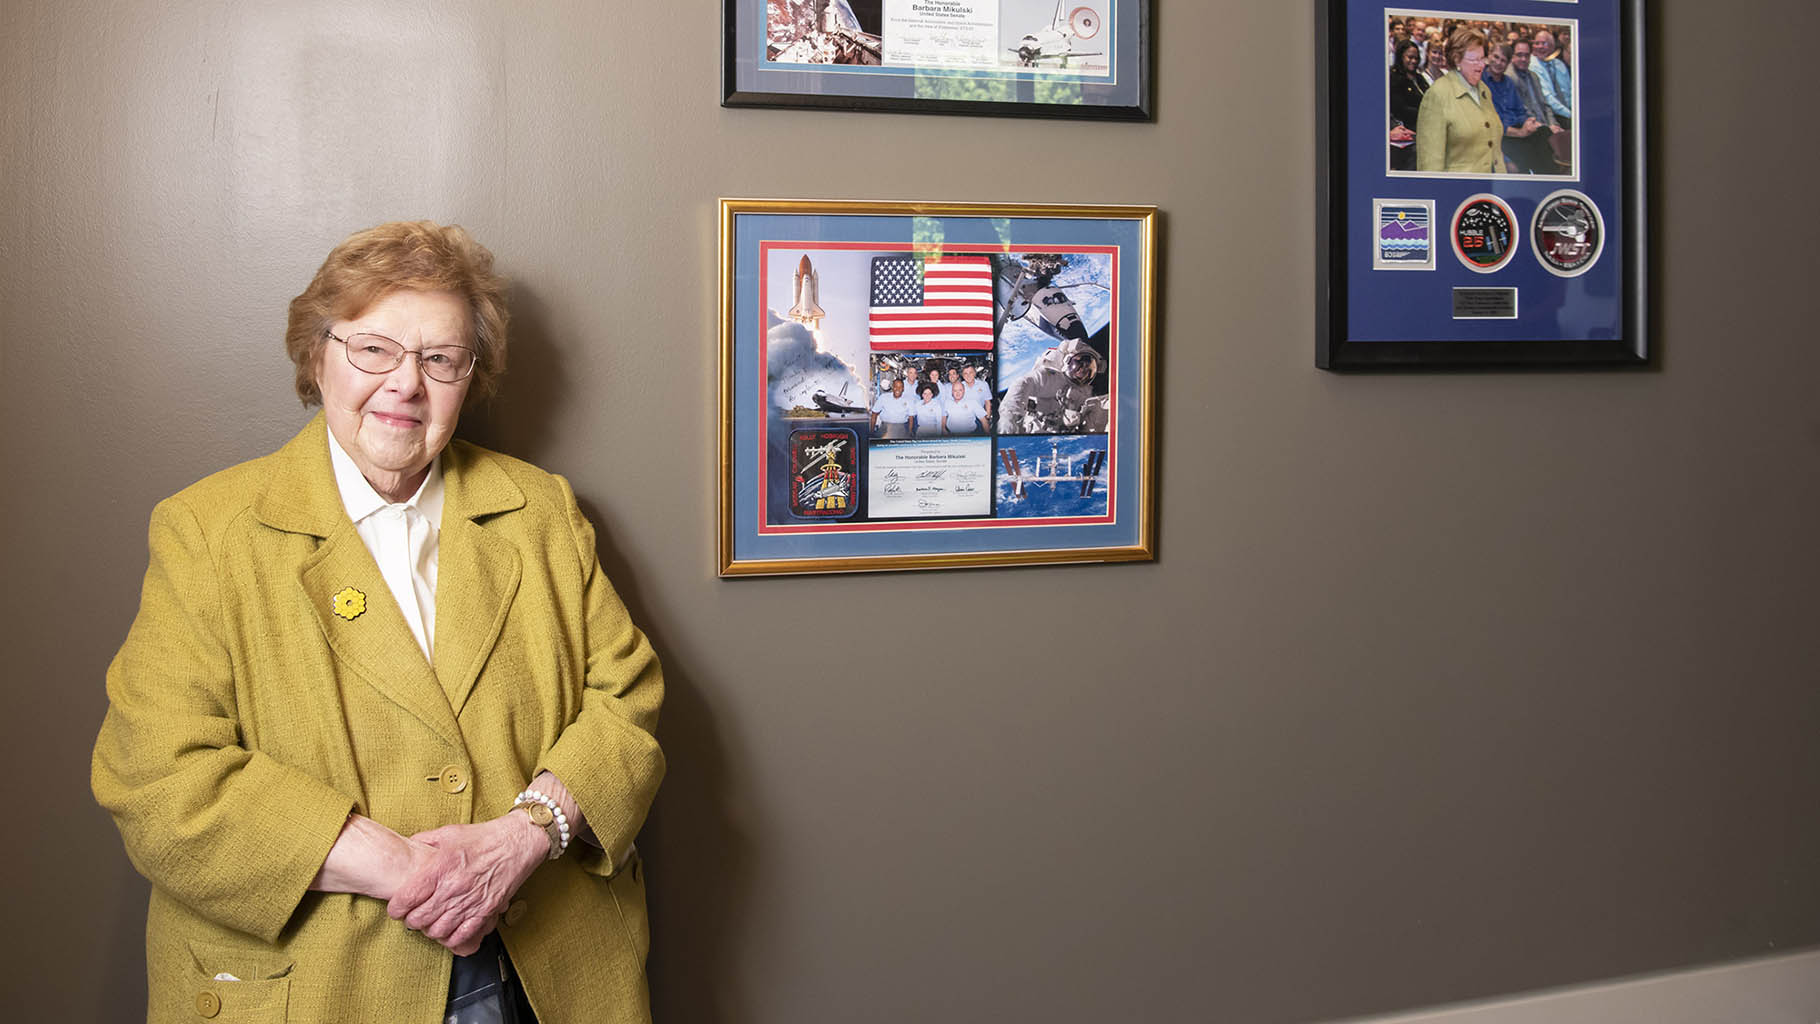 Photograph of Senator Barbara A. Mikulski in a yellow jacket with a white shirt taken July 12, 2022, when she visited the Space Telescope Science Institute to celebrate the public release of the first images from the James Webb Space Telescope. Mikulski is standing in front of framed memorabilia from her donated collection that now hangs in the Muller building on the Johns Hopkins Homewood campus. 